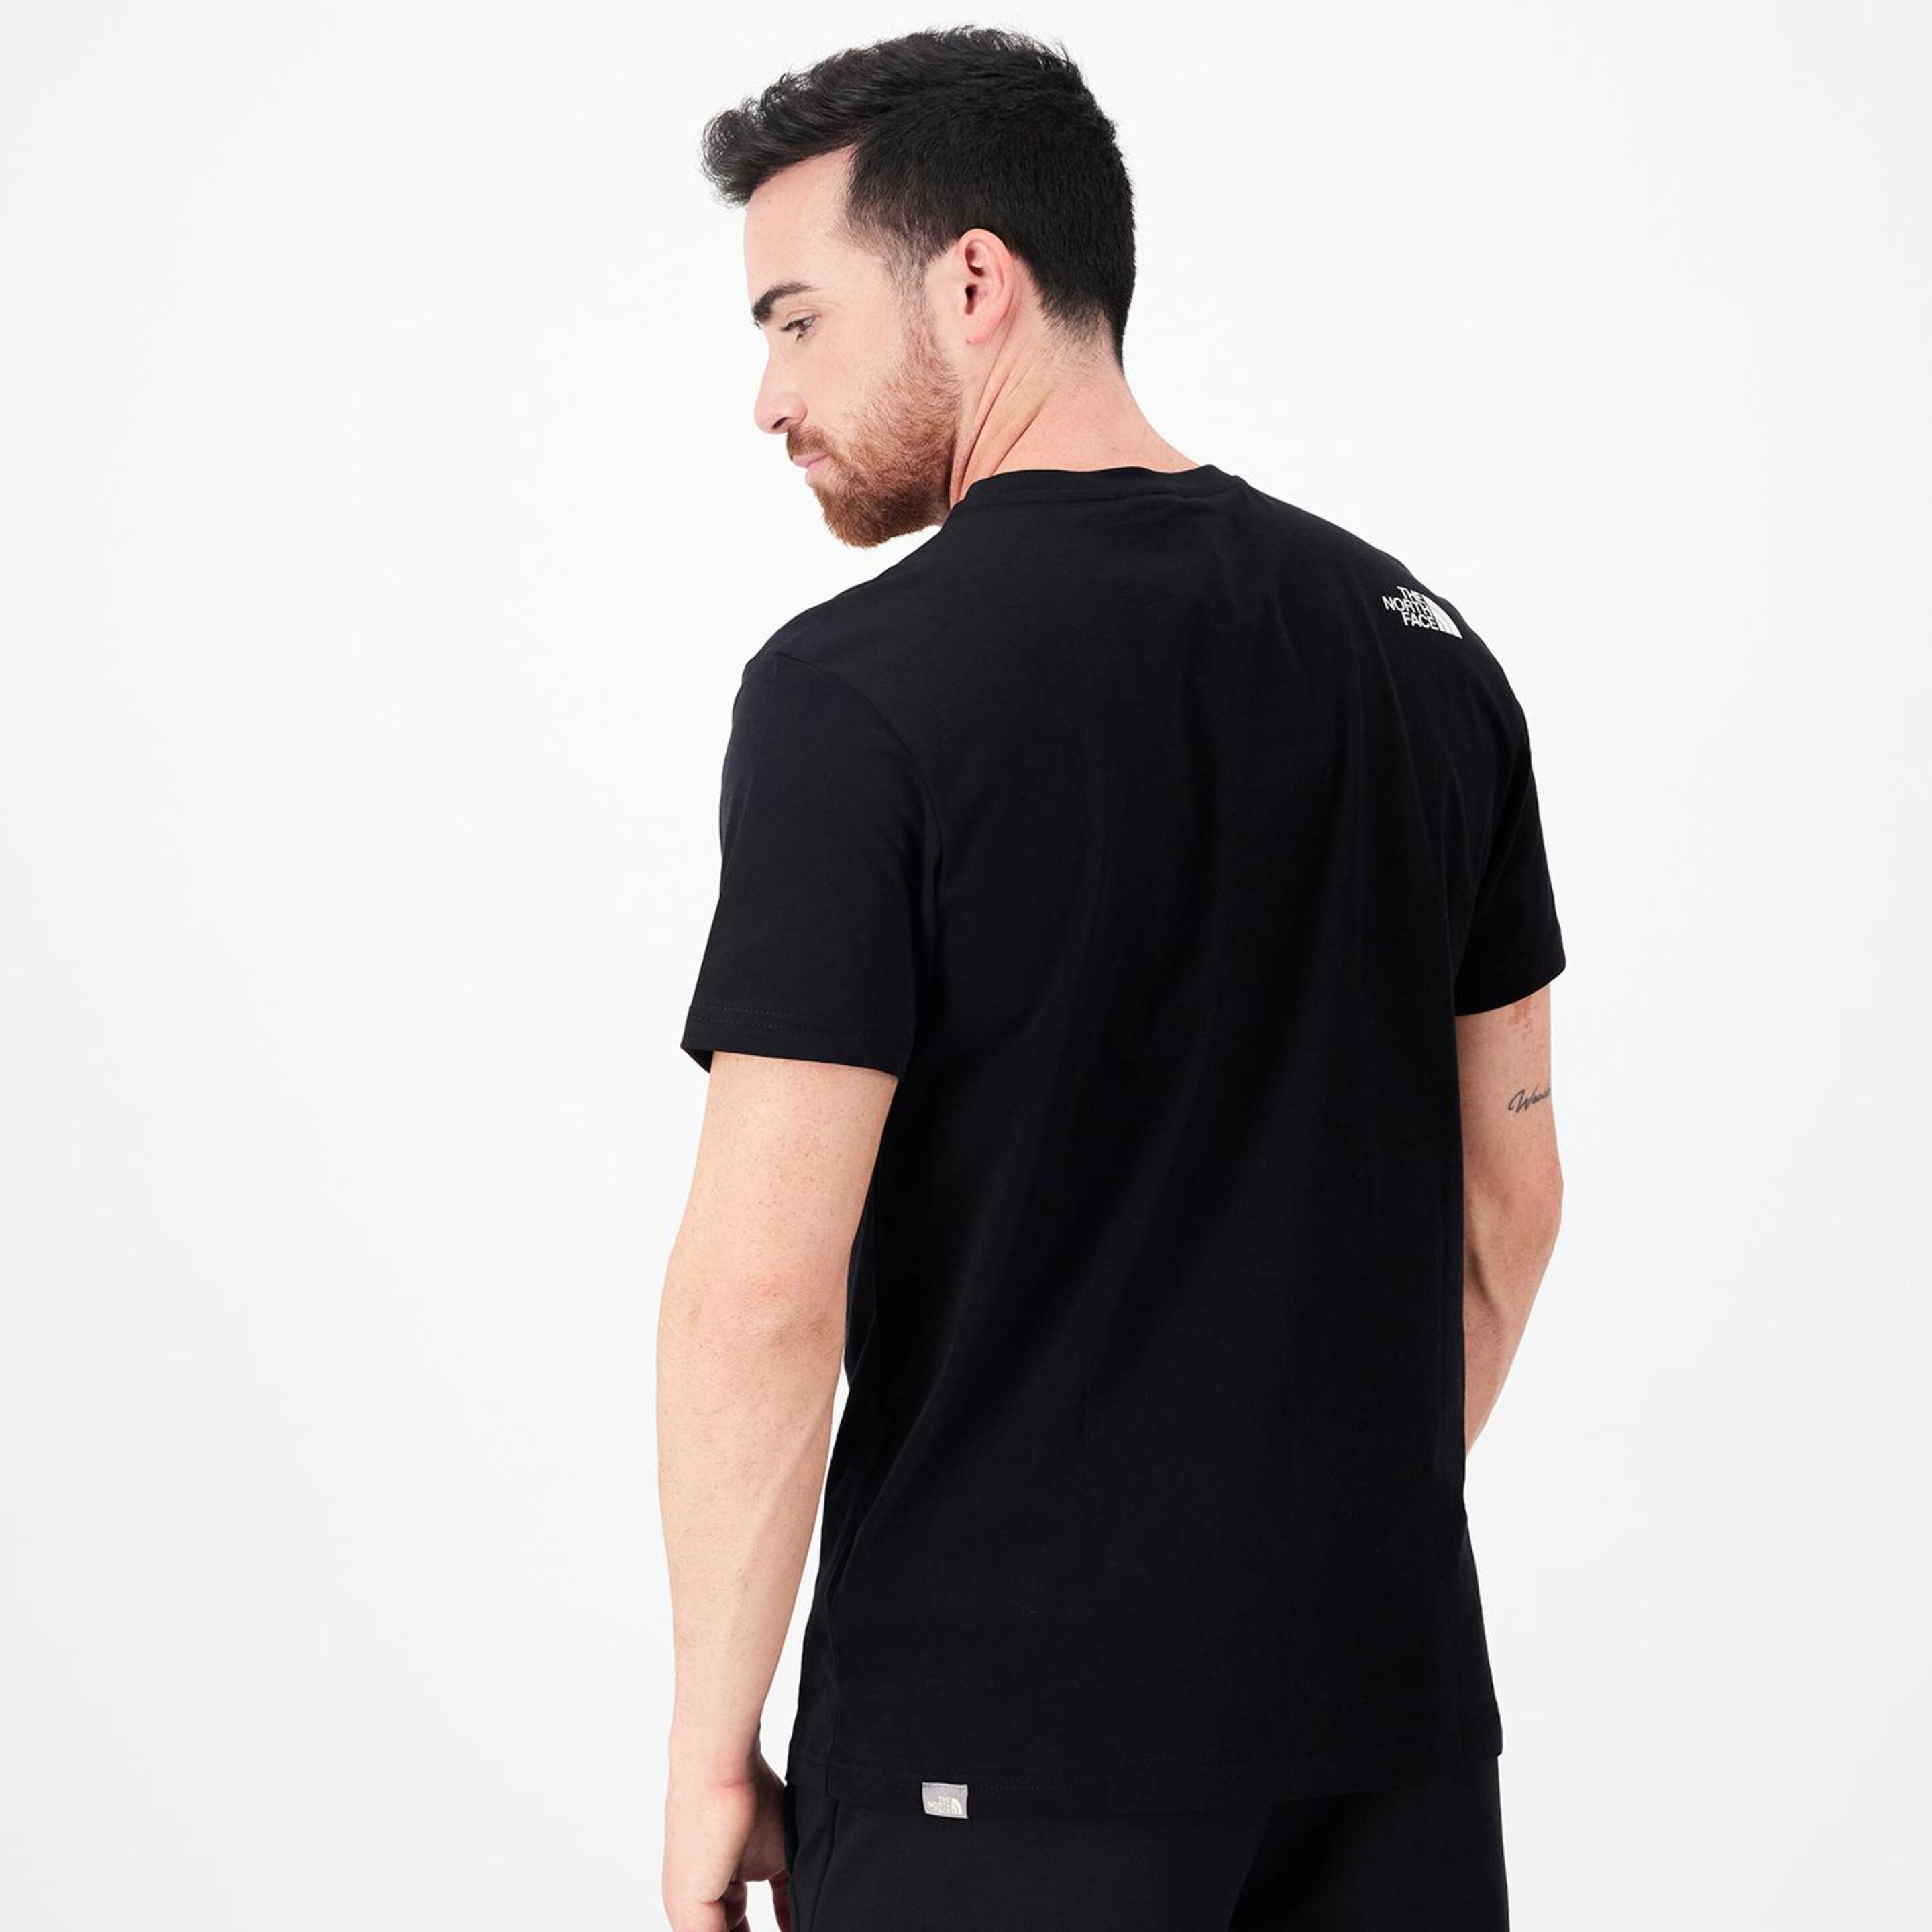 The North Face Simple Dome - Negro - Camiseta Hombre